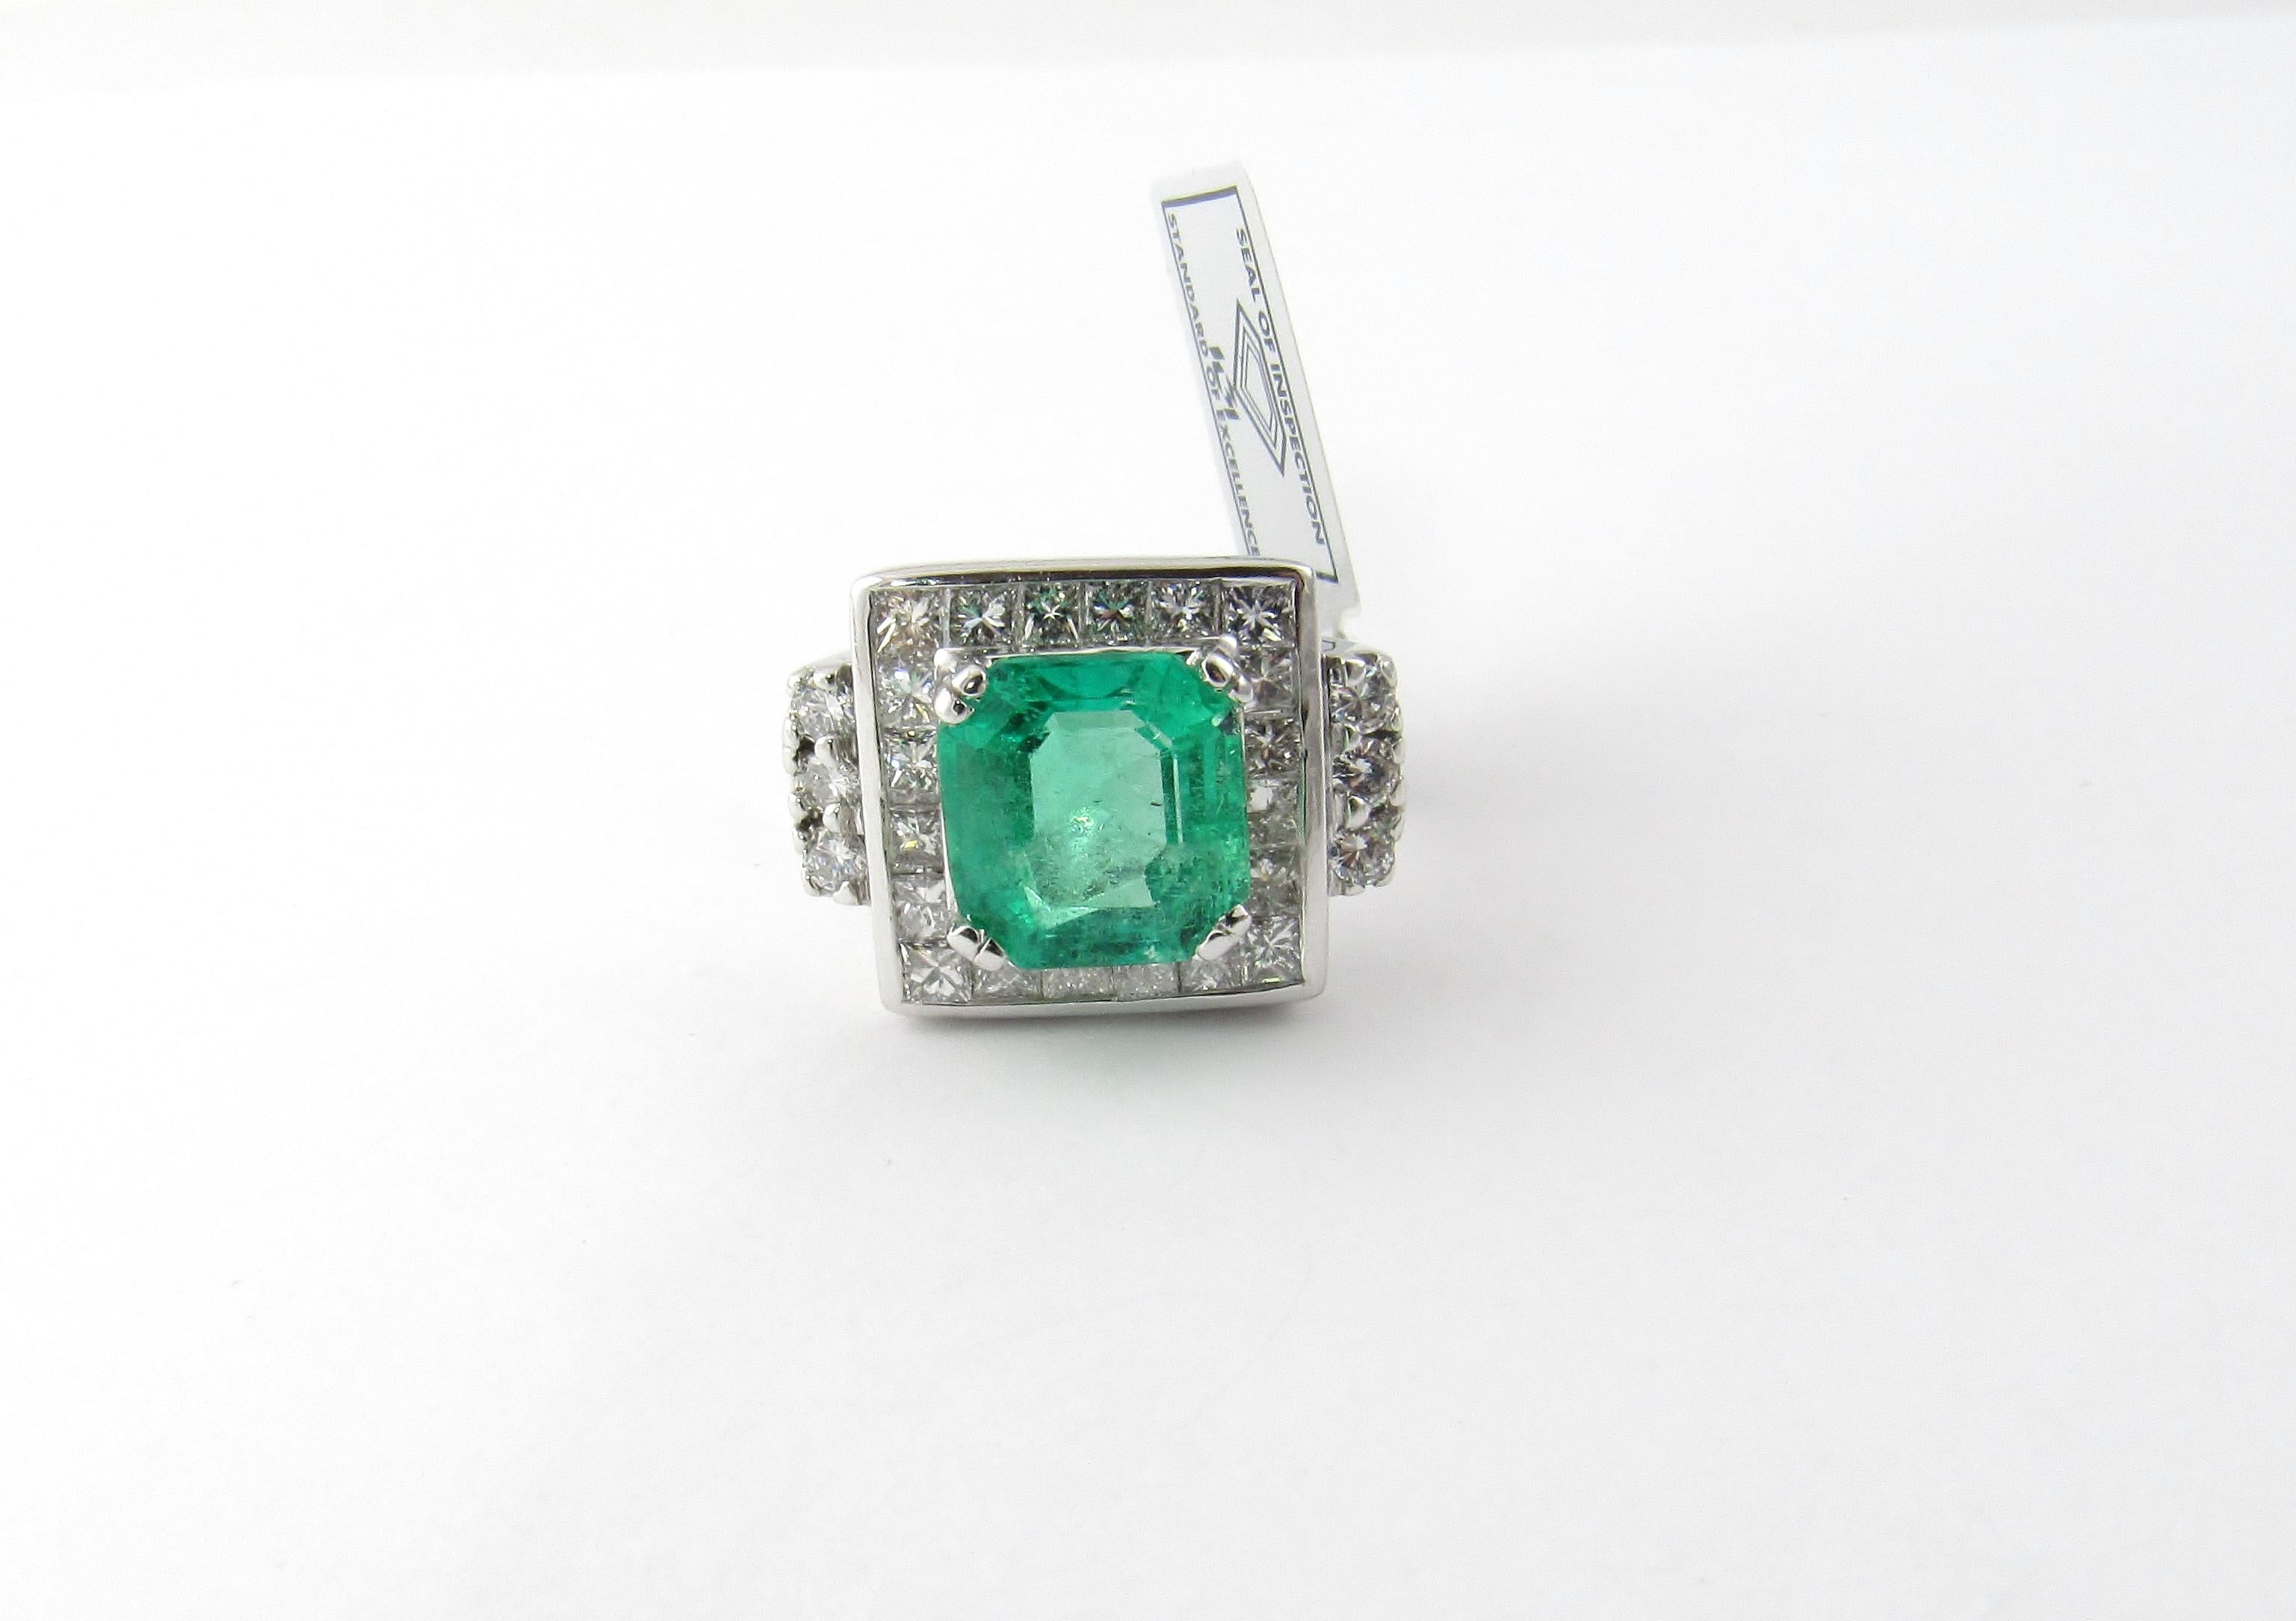 IGI Certified Vintage 17K and 14K White Gold Natural Square Emerald and Diamond Ring Size 8

This natural emerald and diamond cocktail ring is meant to be noticed!

The ring is stamped 18K. When lab tested, it was found to be 17K and 14K white gold